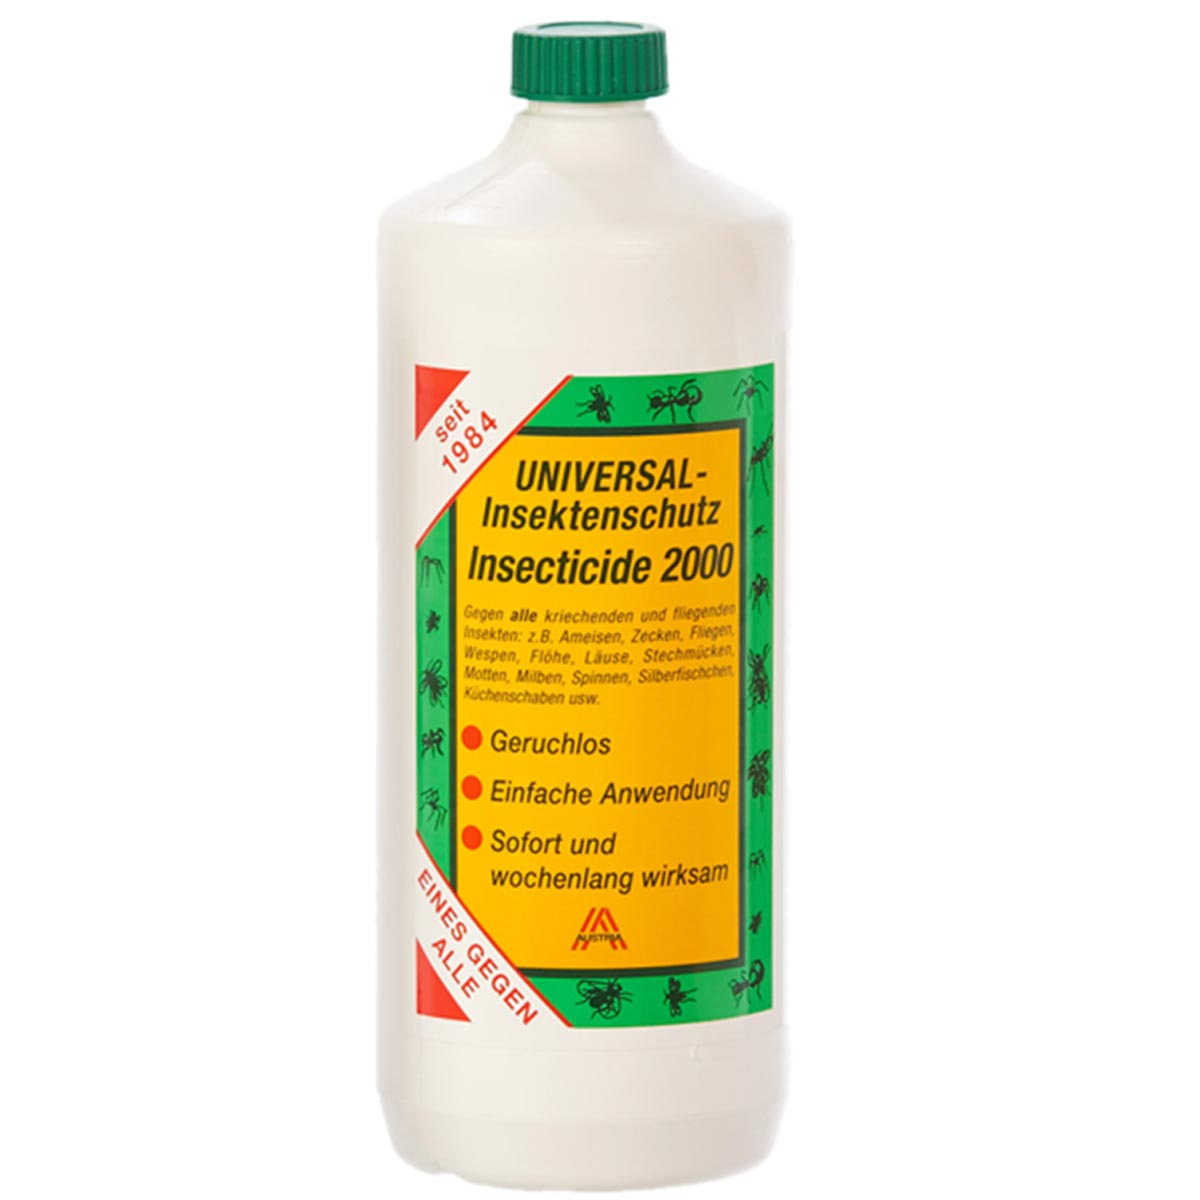 Insecticide 2000 - universal pest control